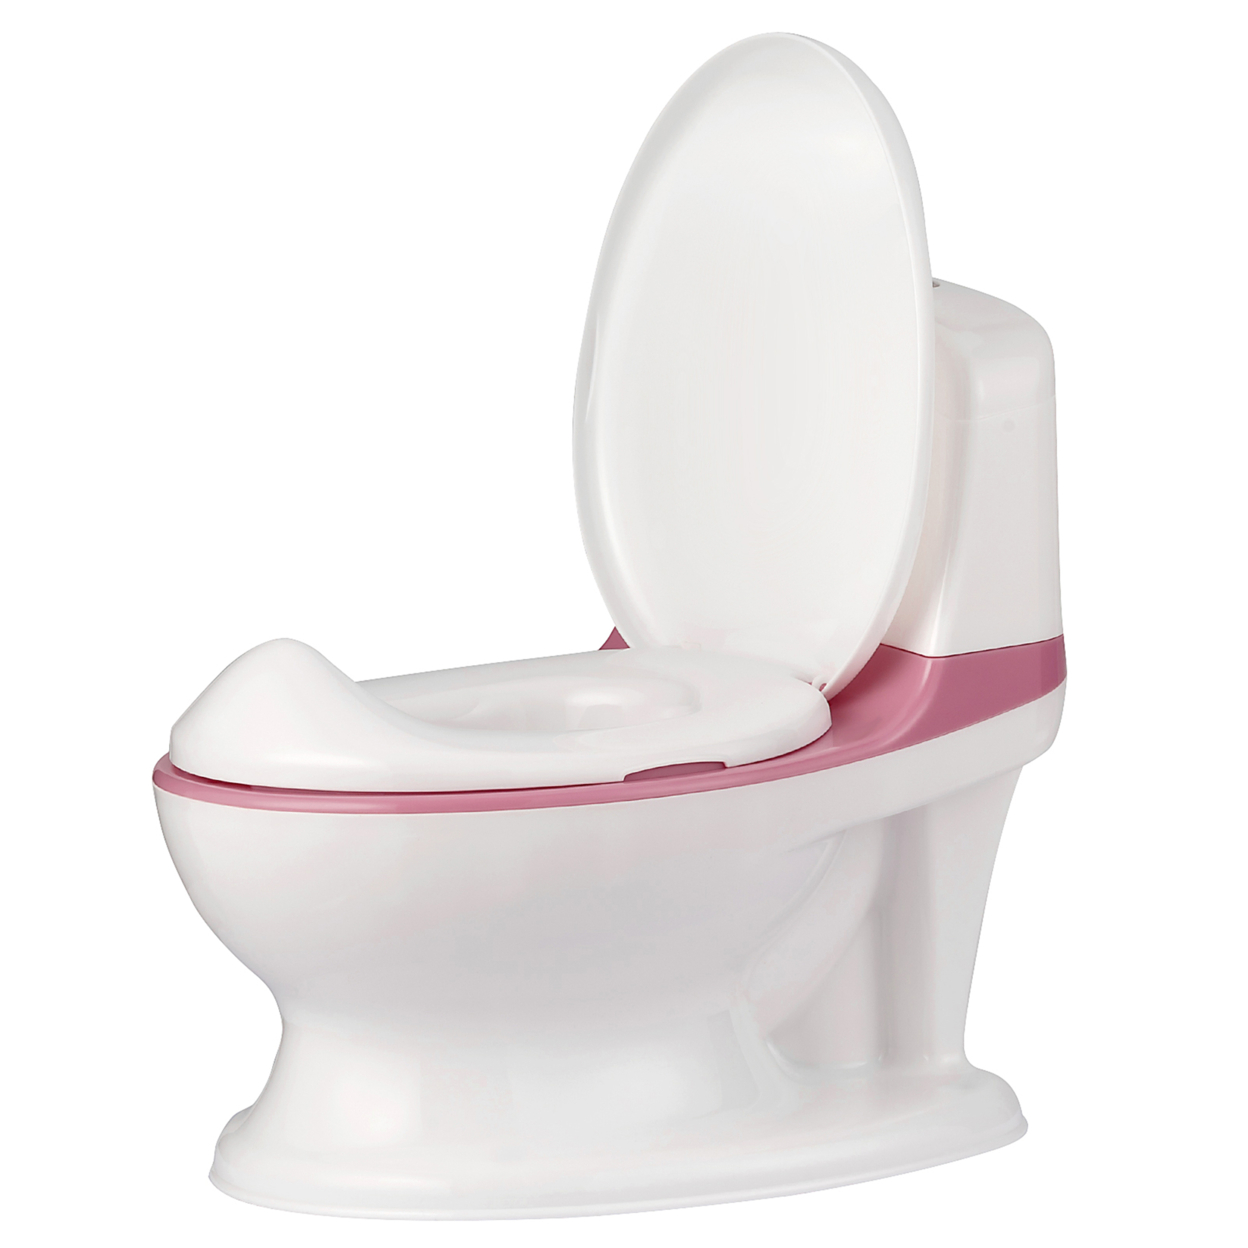 Realistic Potty Training Toilet Kids Toddlers W/ Flush Sound Blue/Gray/Pink - Pink